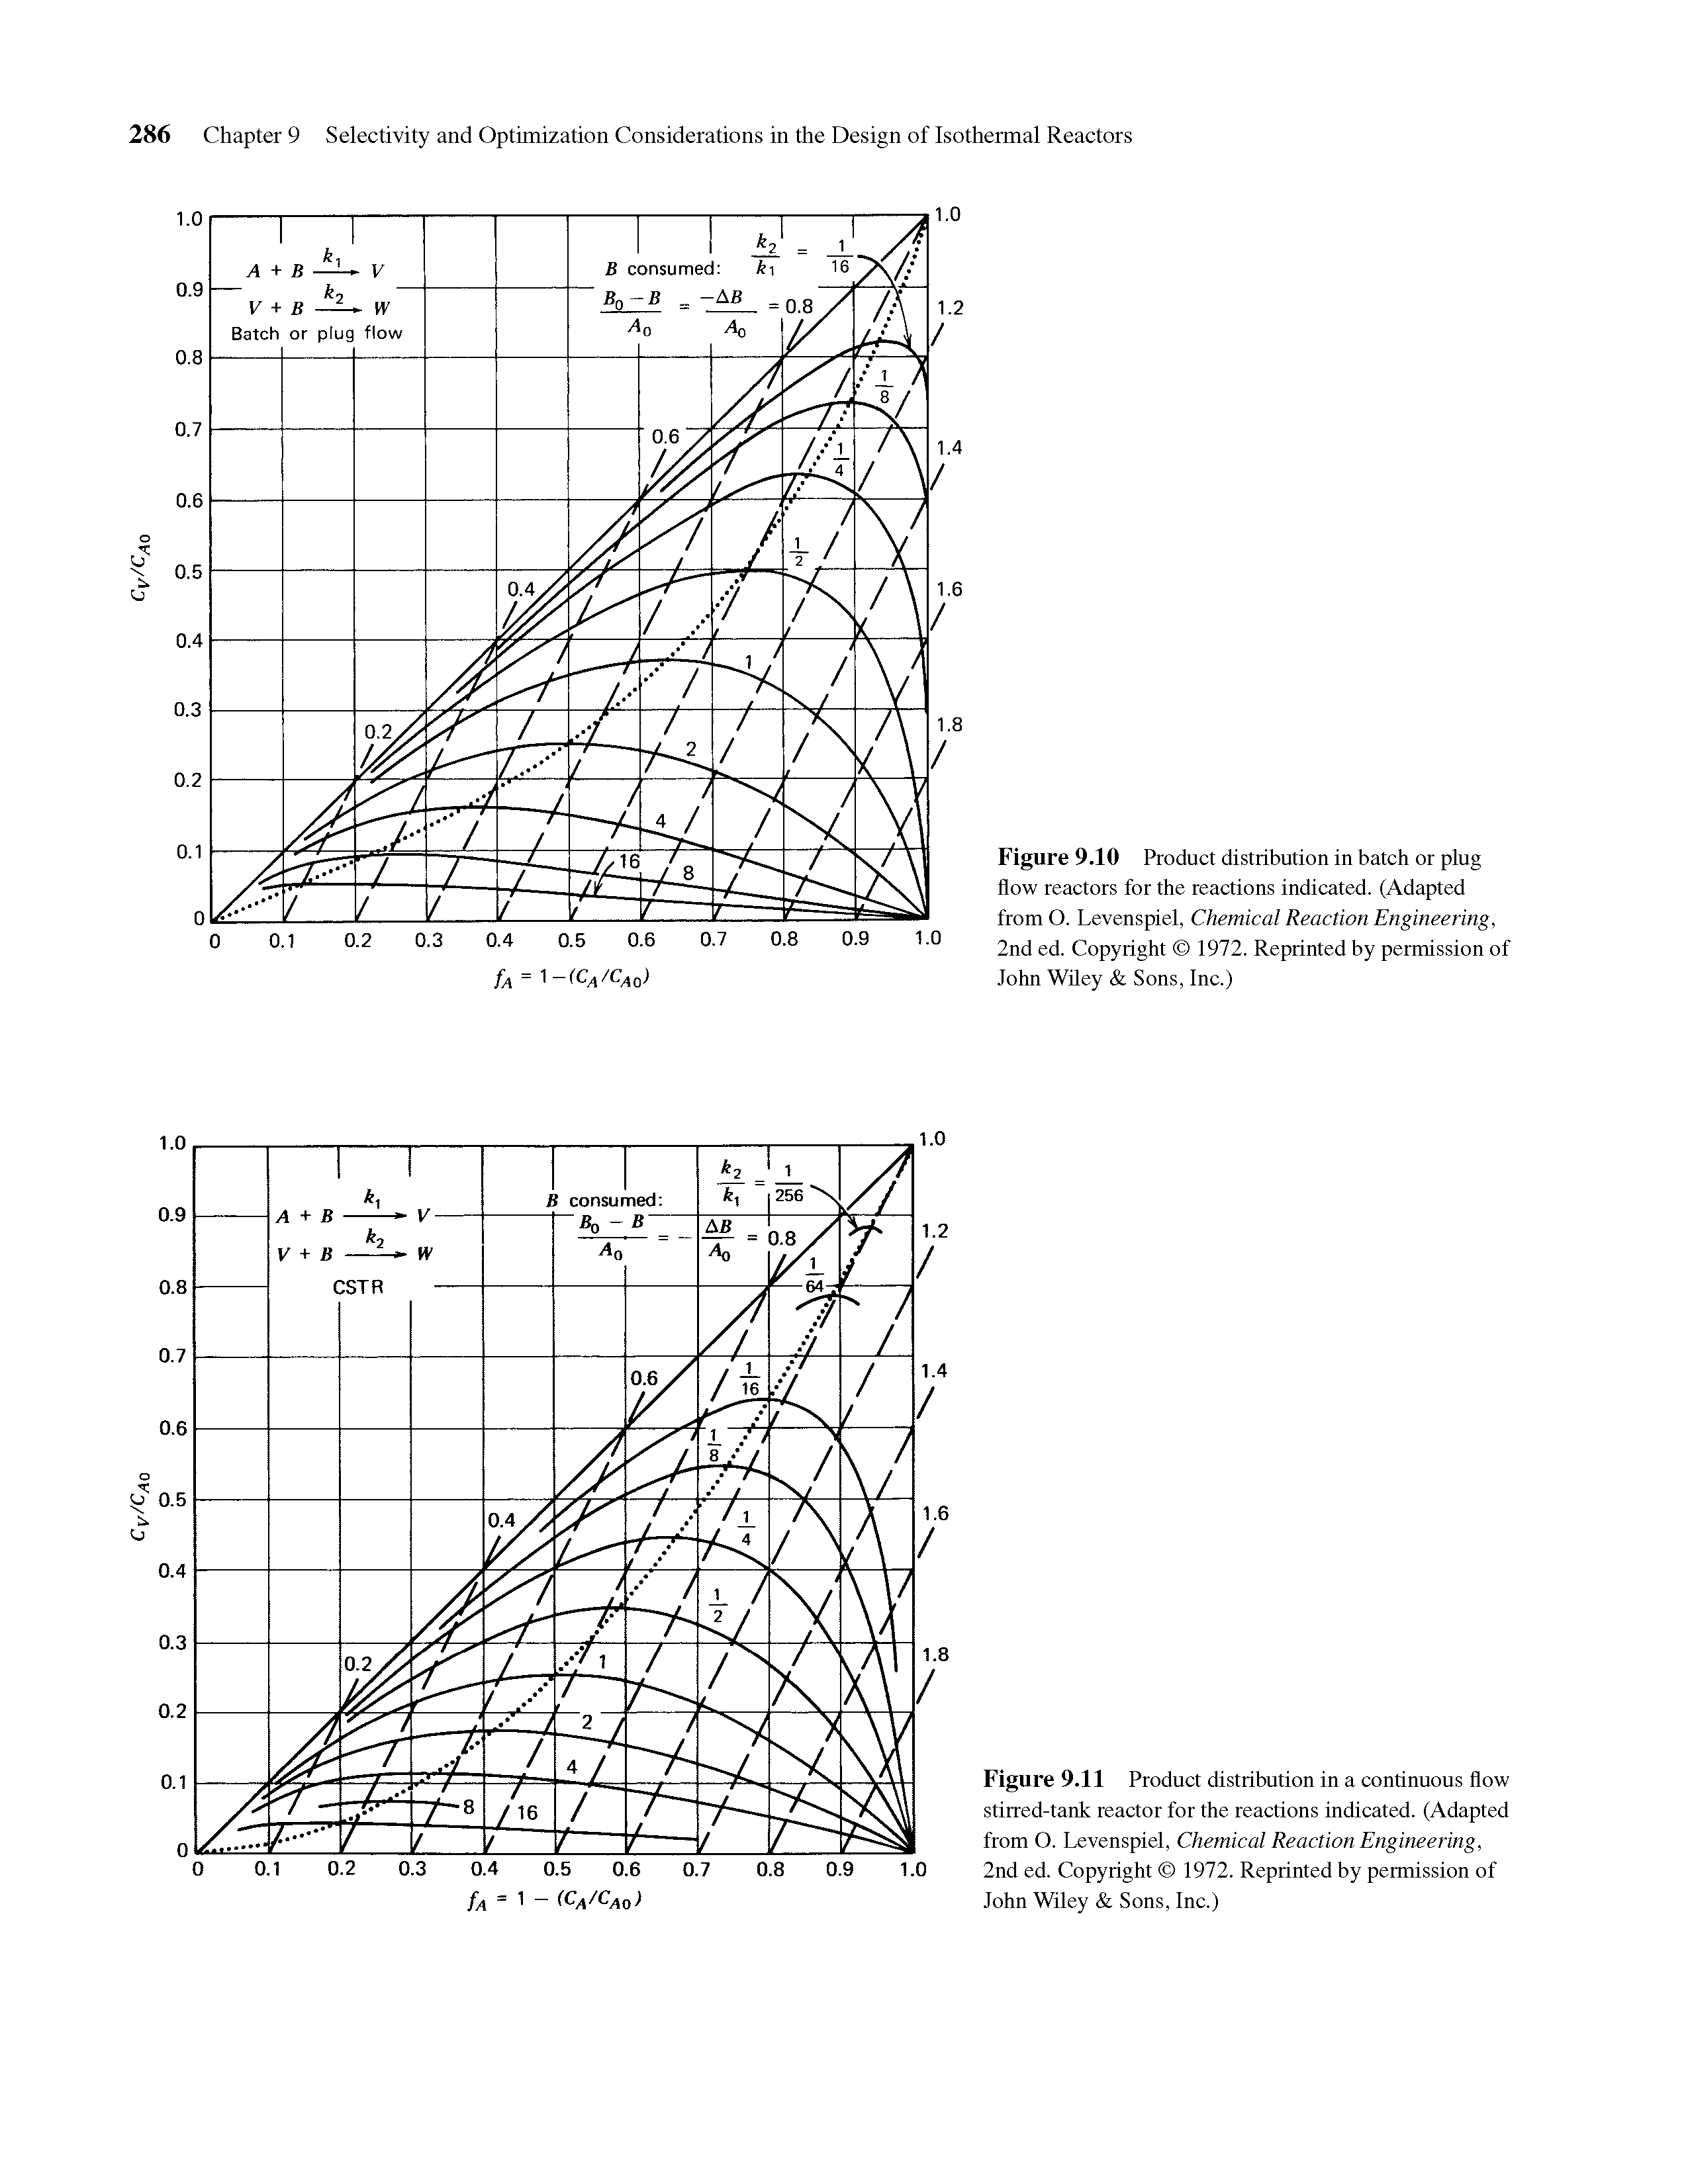 Figure 9.11 Product distribution in a continuous flow stirred-tank reactor for the reactions indicated. (Adapted from O. Levenspiel, Chemical Reaction Engineering, 2nd ed. Copyright 1972. Reprinted by permission of John Wiley Sons, Inc.)...